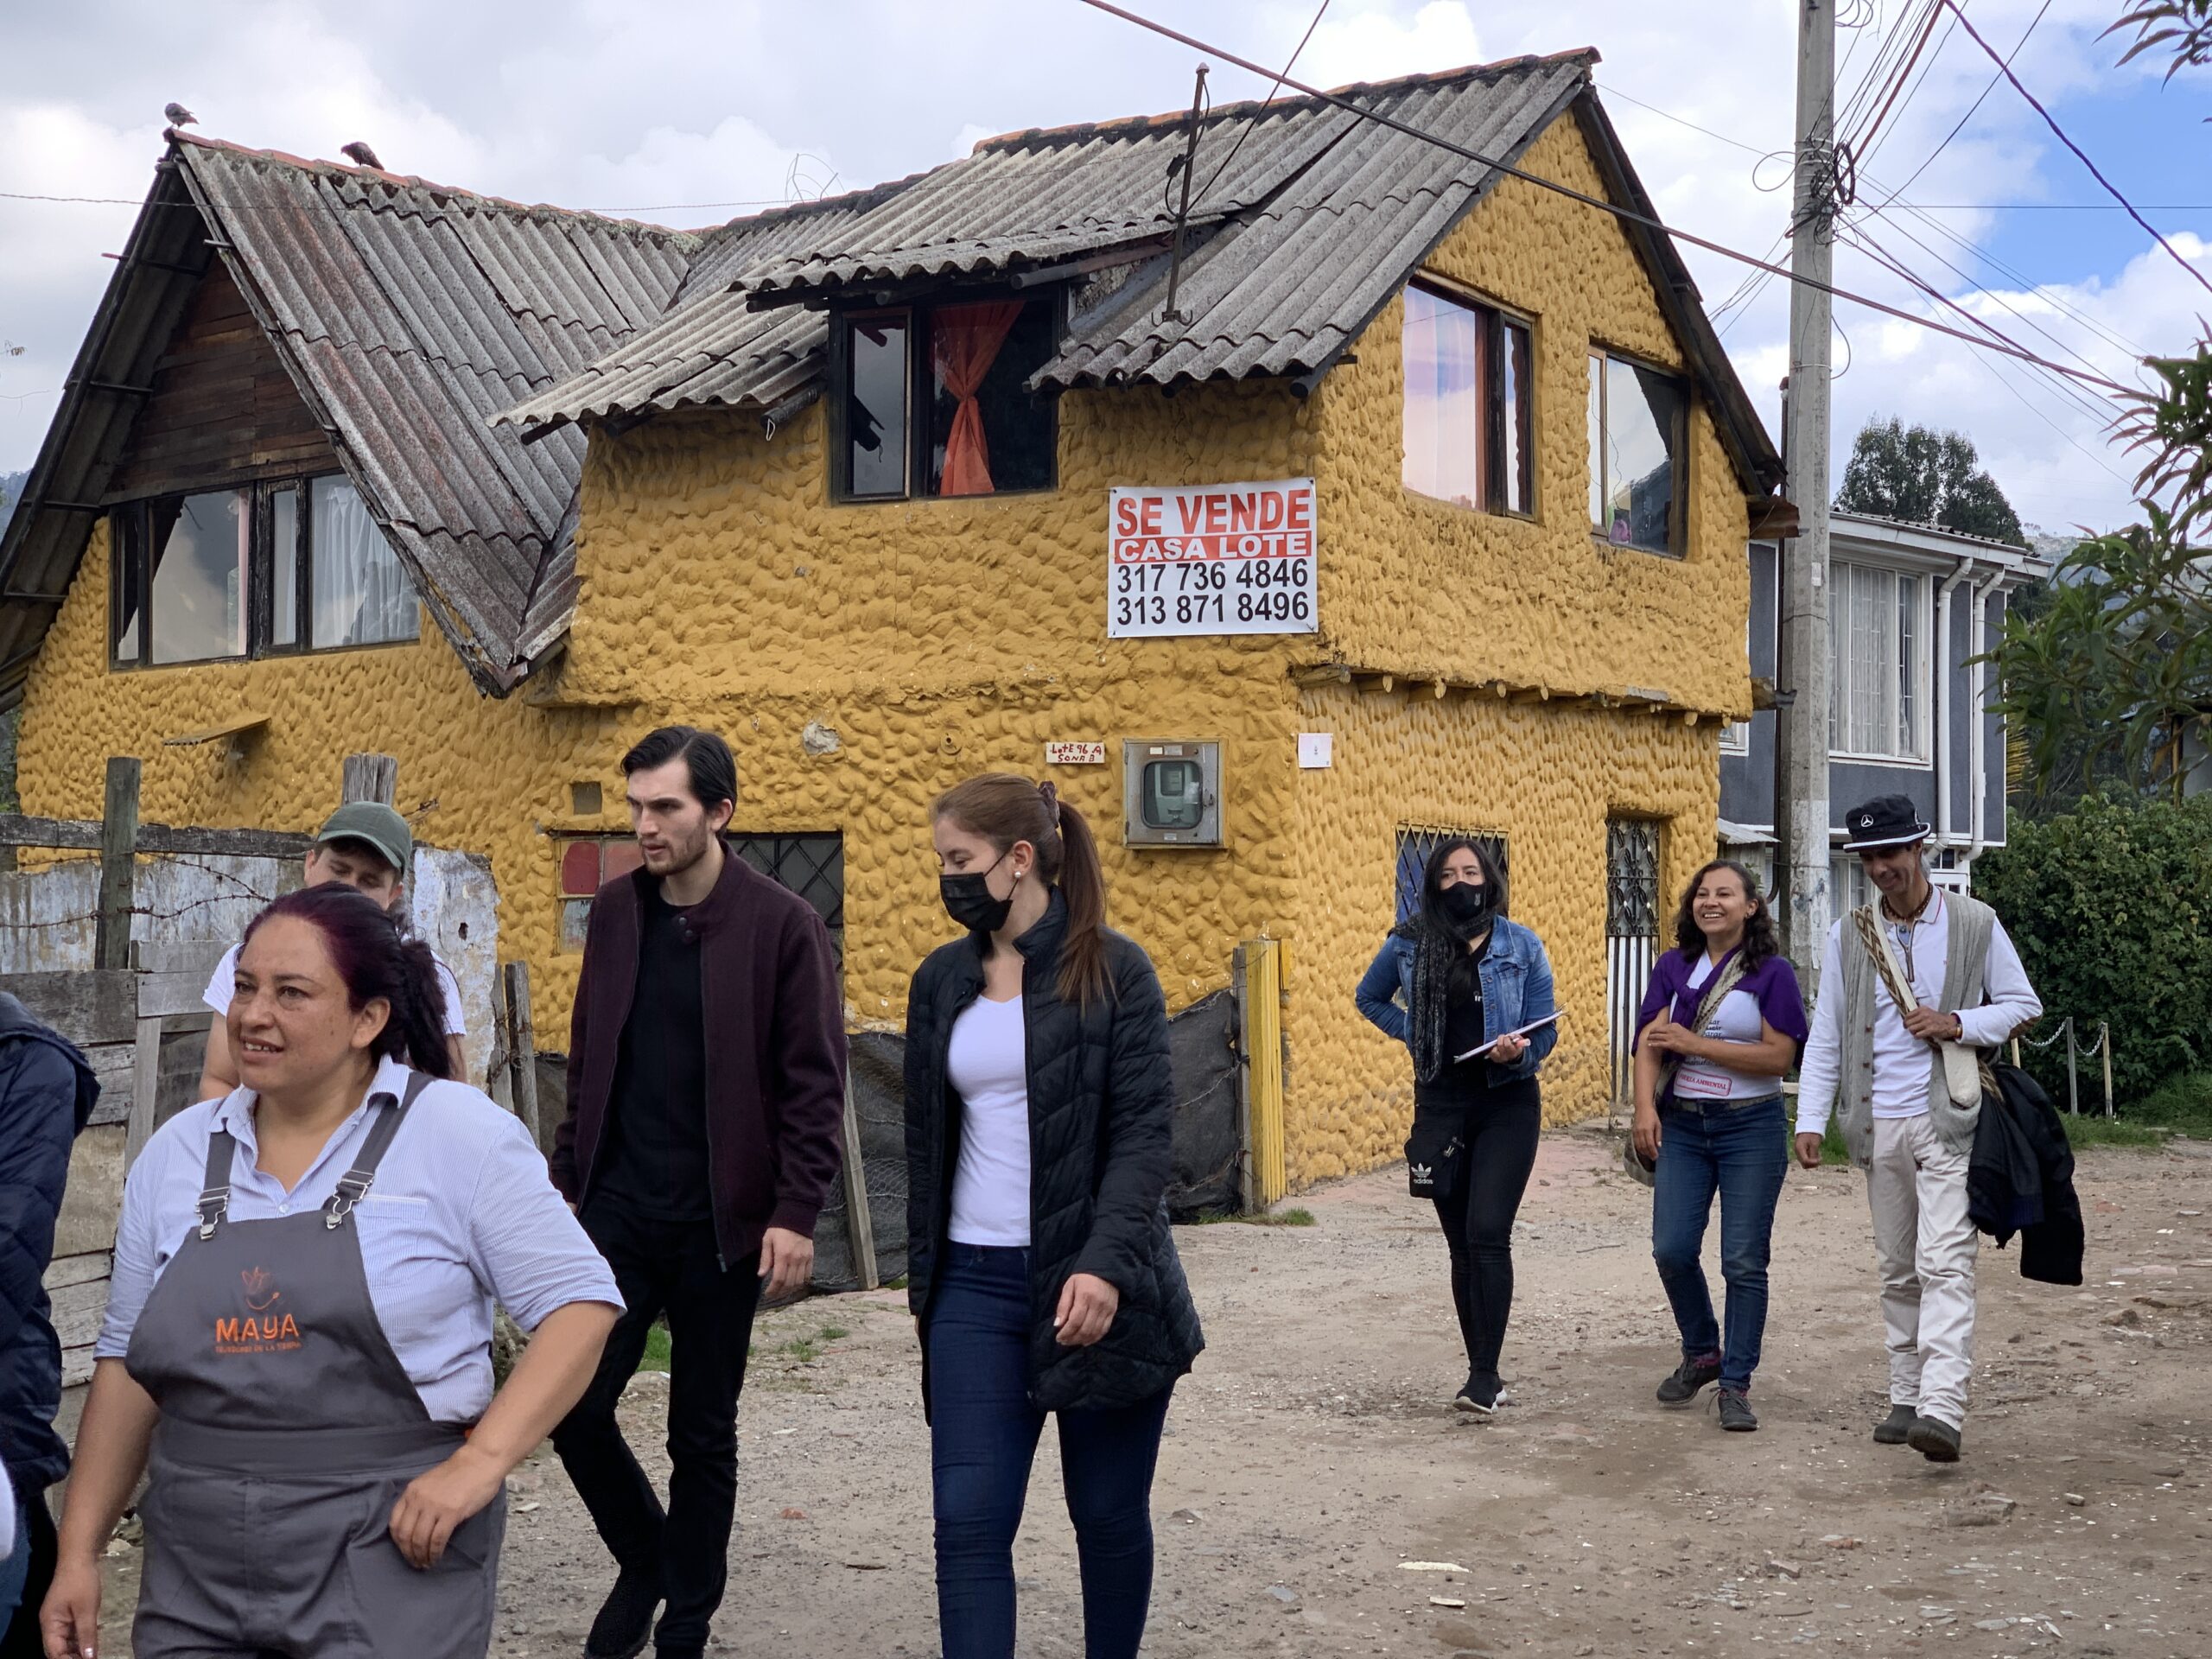 From Workshop to Real Life: Gehl and Novo Nordisk begin Pilot Project in Bogotá